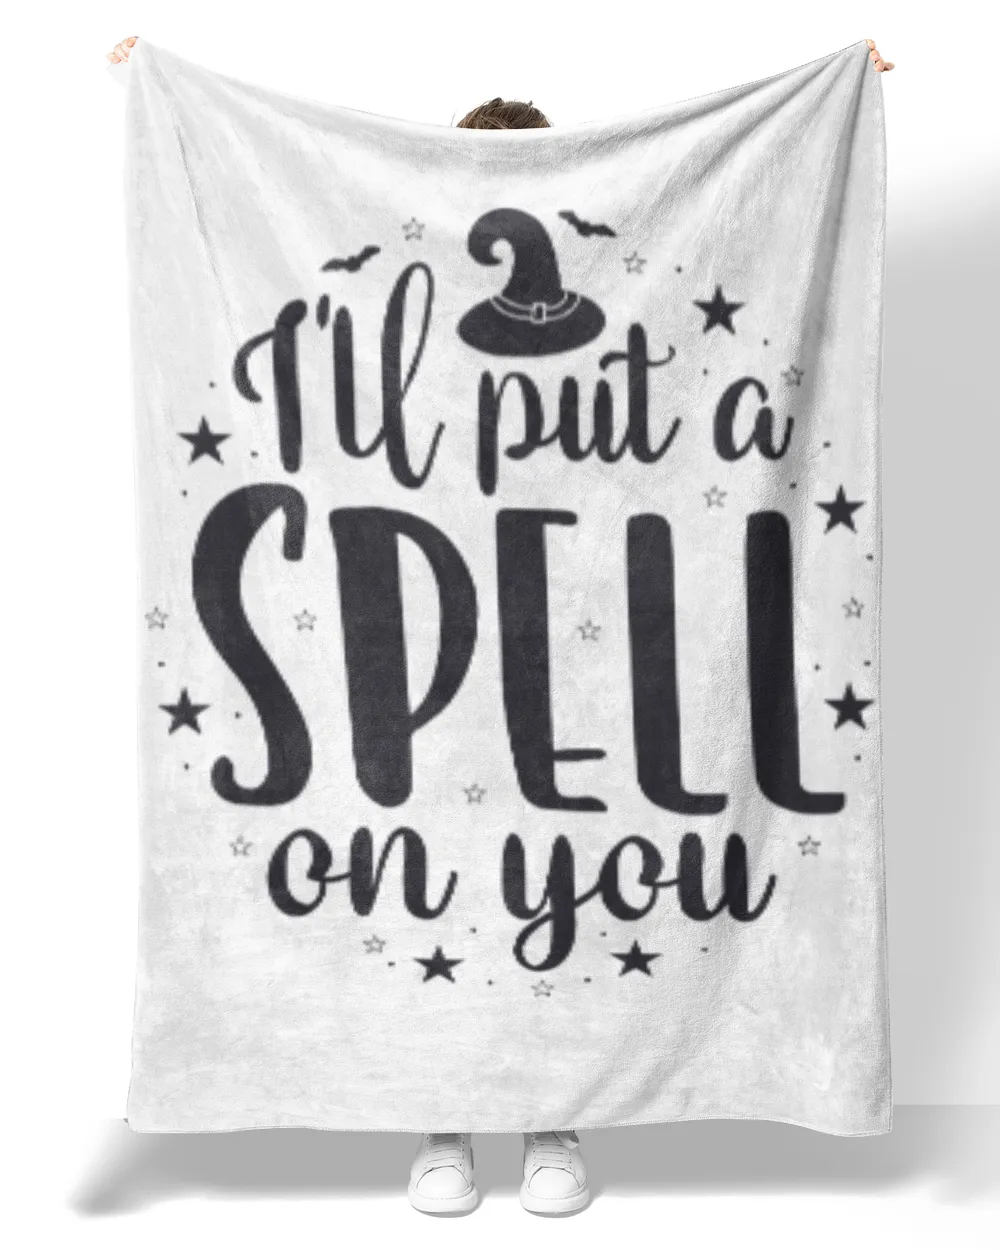 Funny quote for Halloween I will put a spell on you